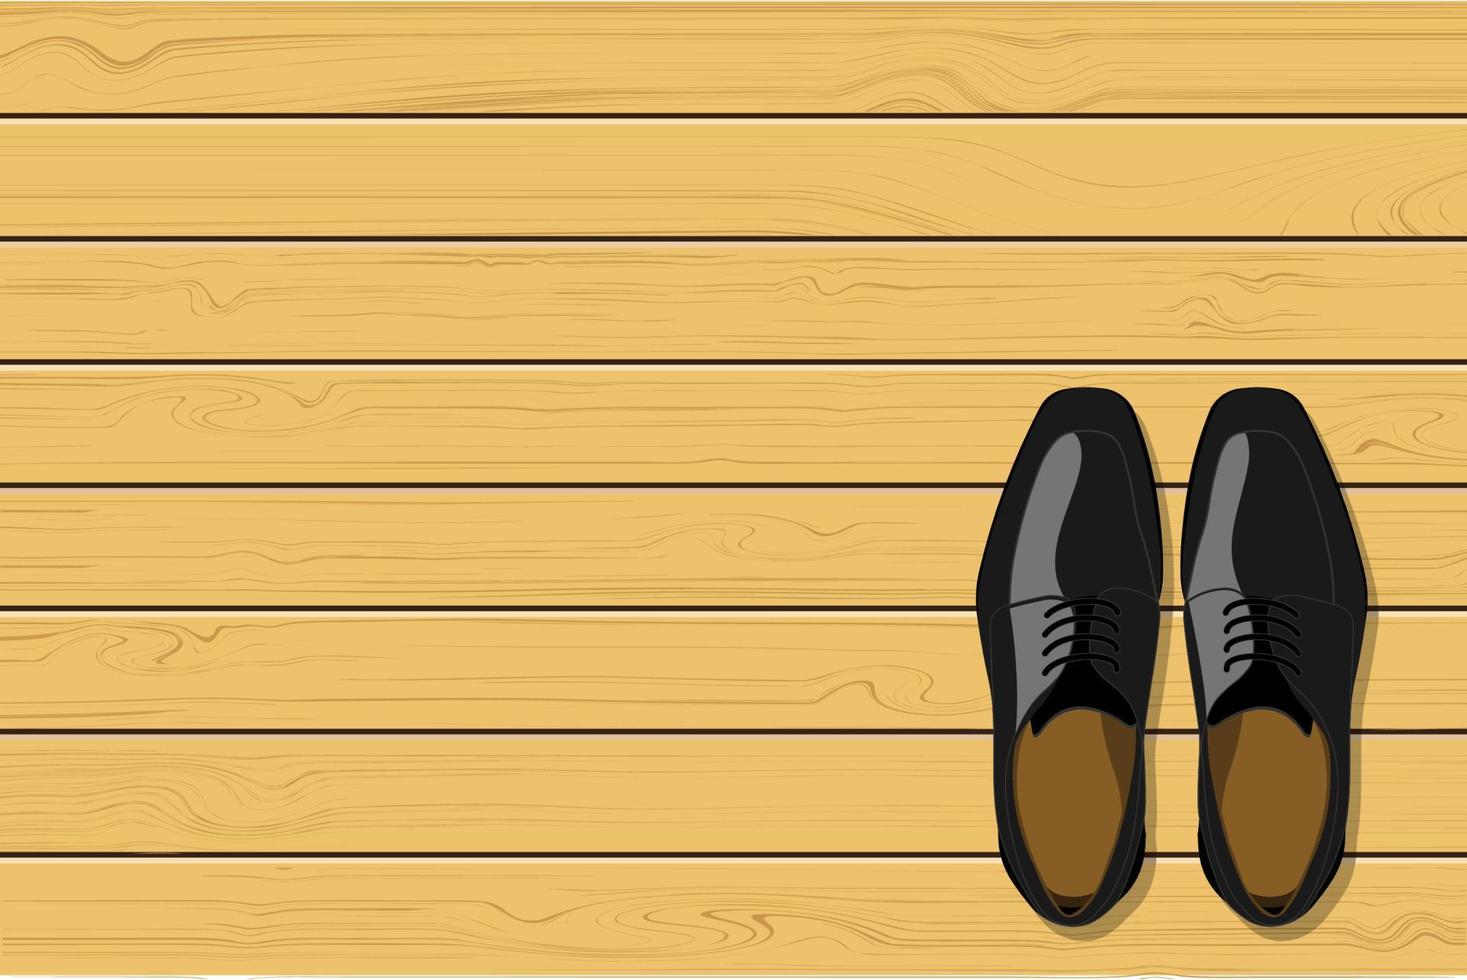 Top view of black leather men's shoes on wooden background, vector illustration